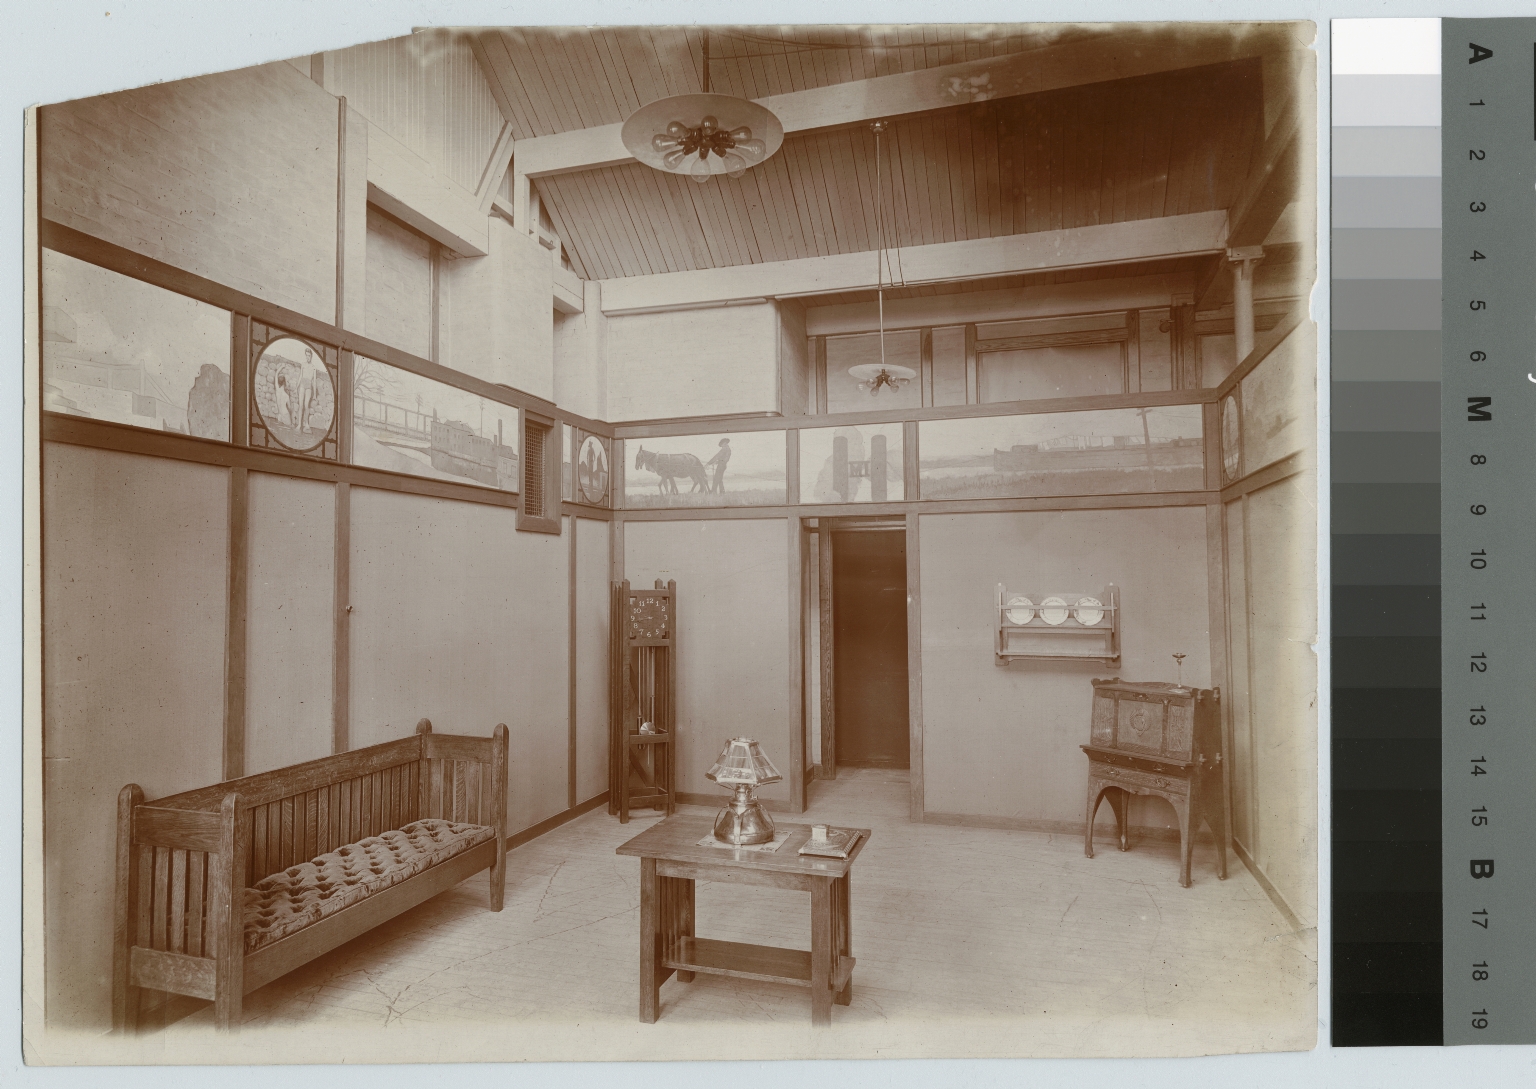 Academics, art and design, interior view of an exhibition of student work in the arts and crafts manner. [1900-1920]